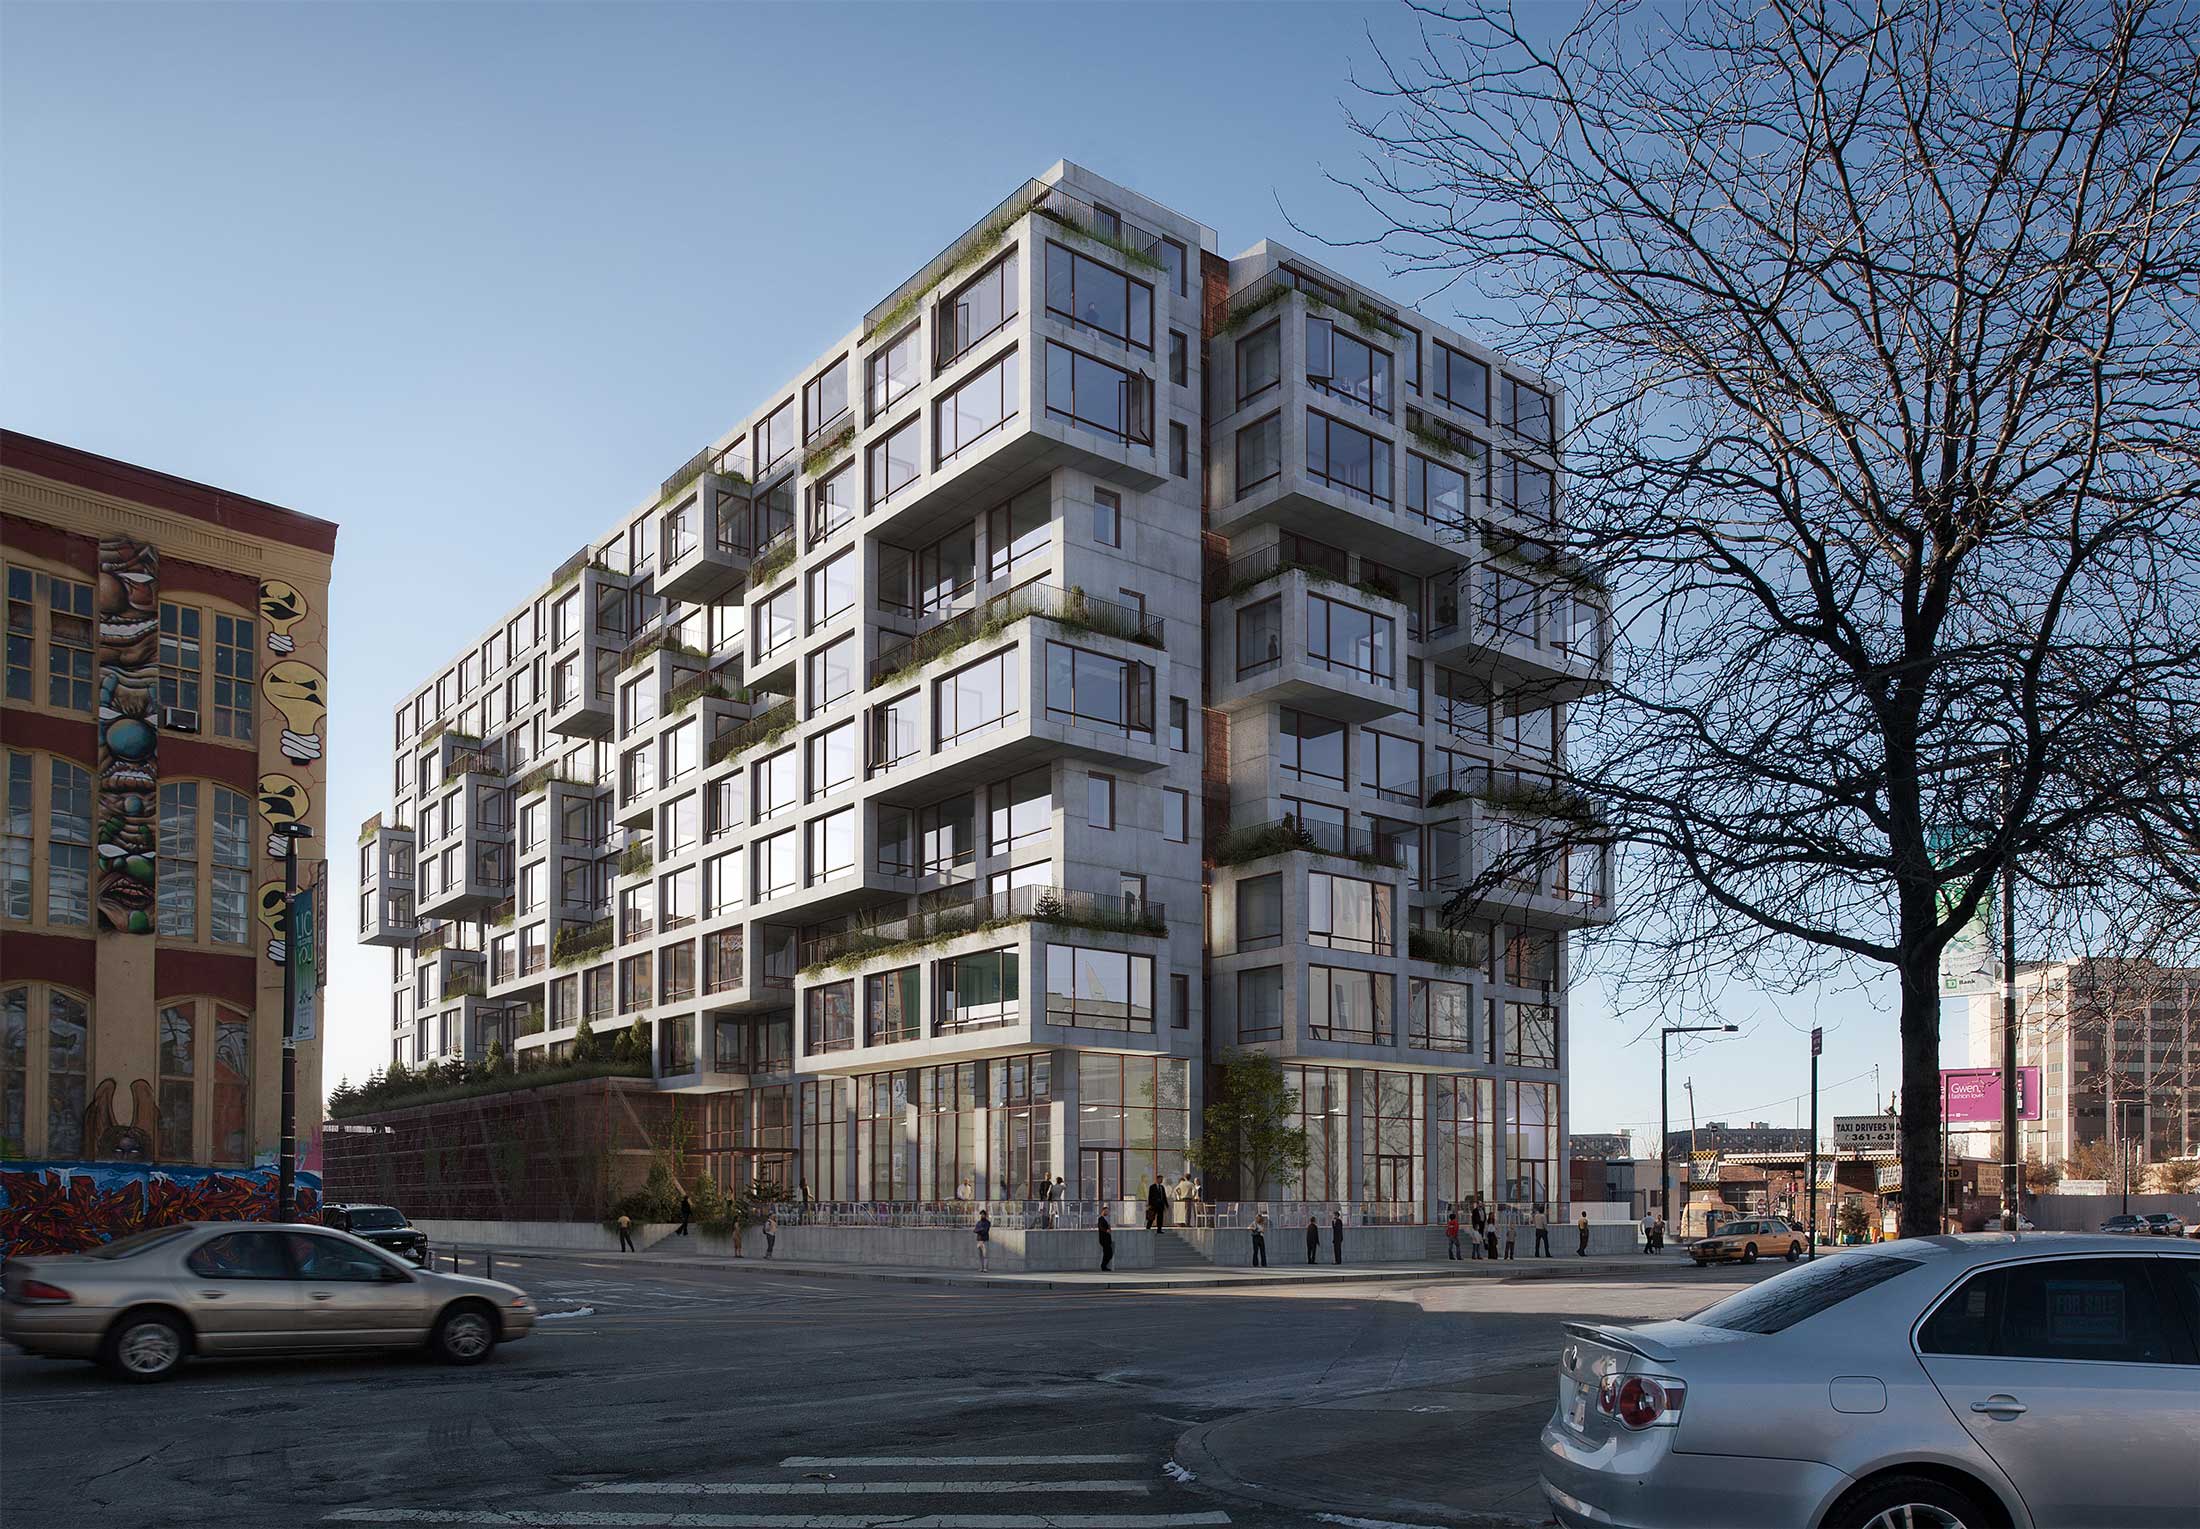 Architectural Rendering of the exterior of the 22-22 Jackson Avenue project located in Long Island City, Queens, New York